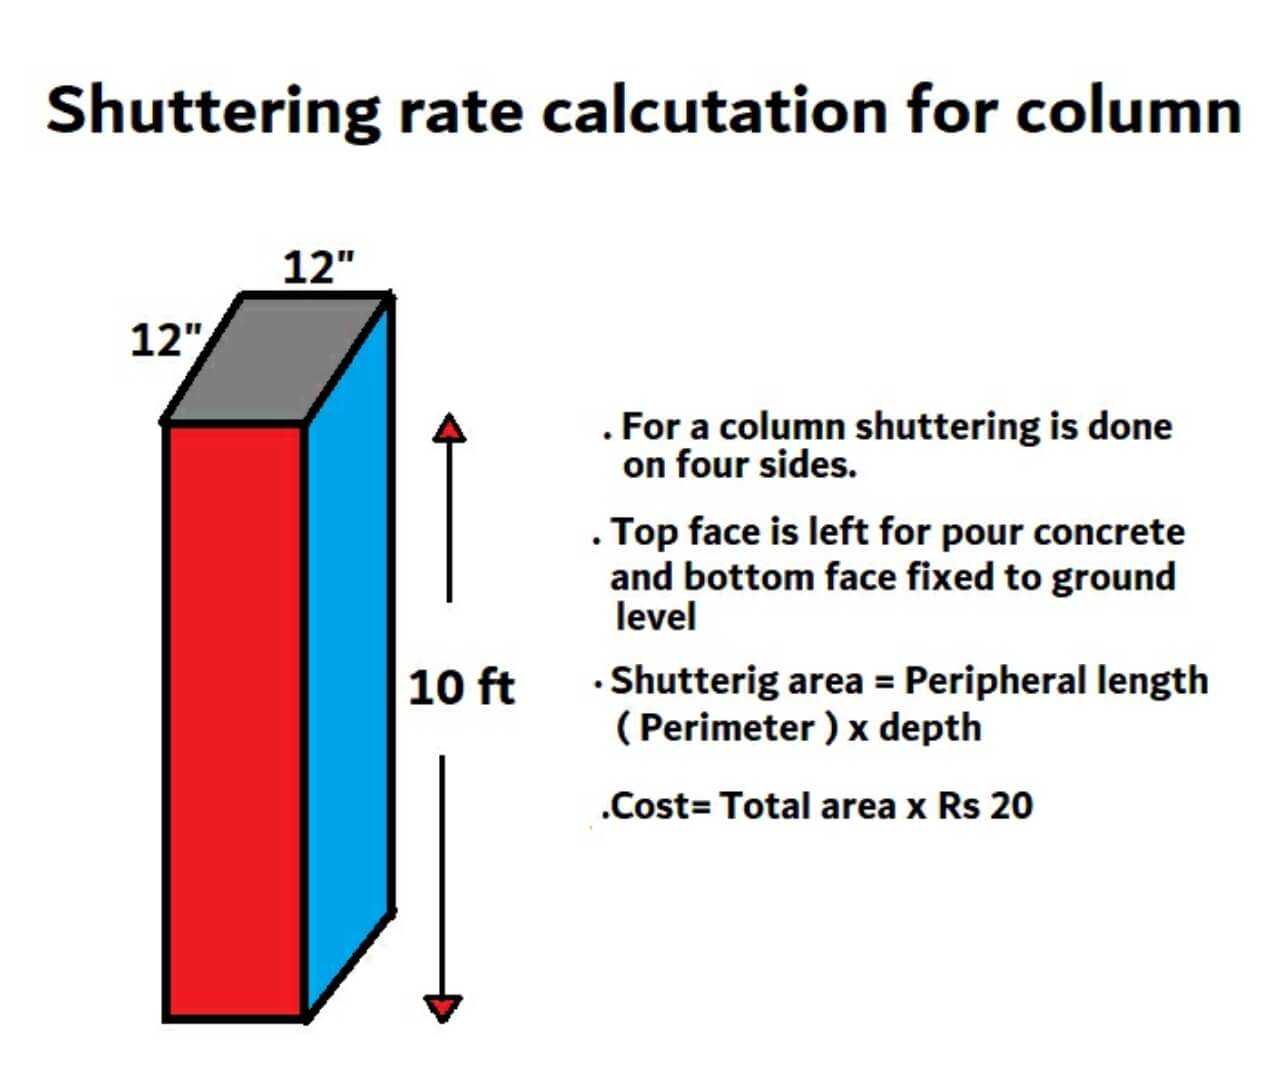 Shuttering rate/ cost calculation for column